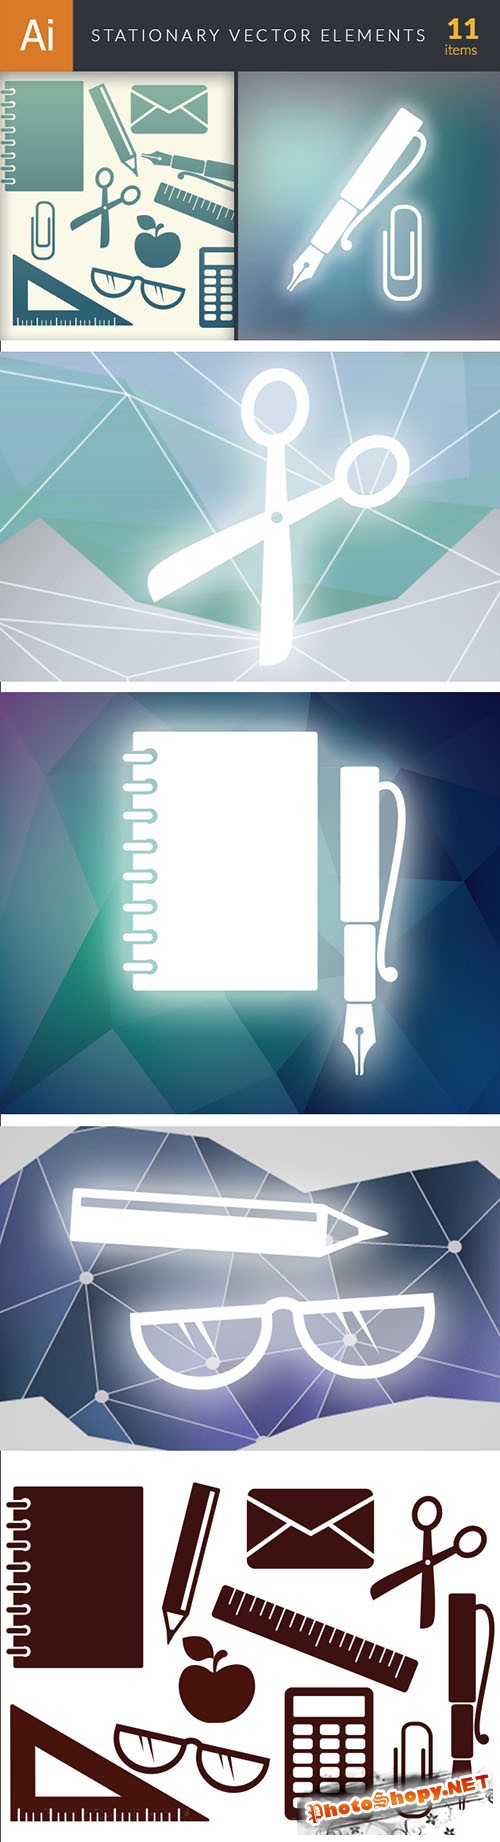 Simple Stationary Vector Elements Set 1